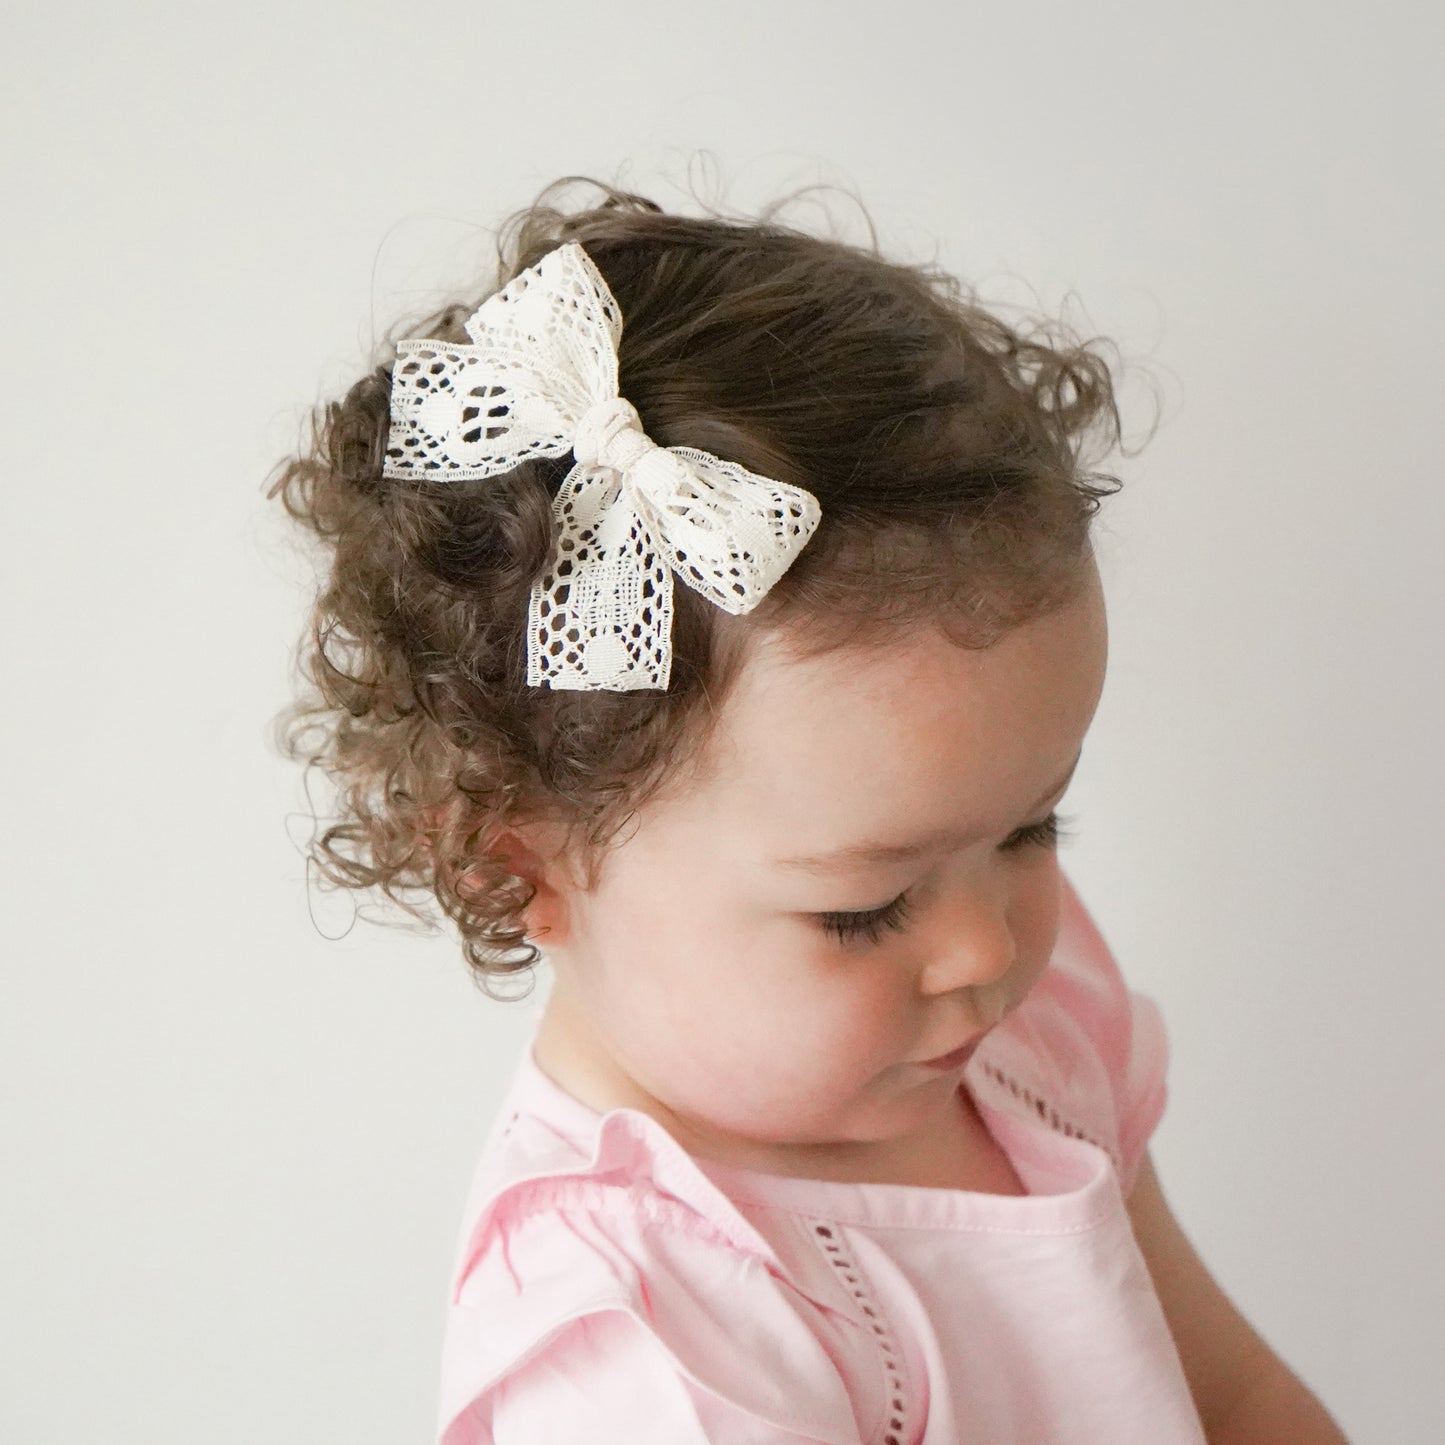 Toddler wearing Abigail lace ivory cream off white bow